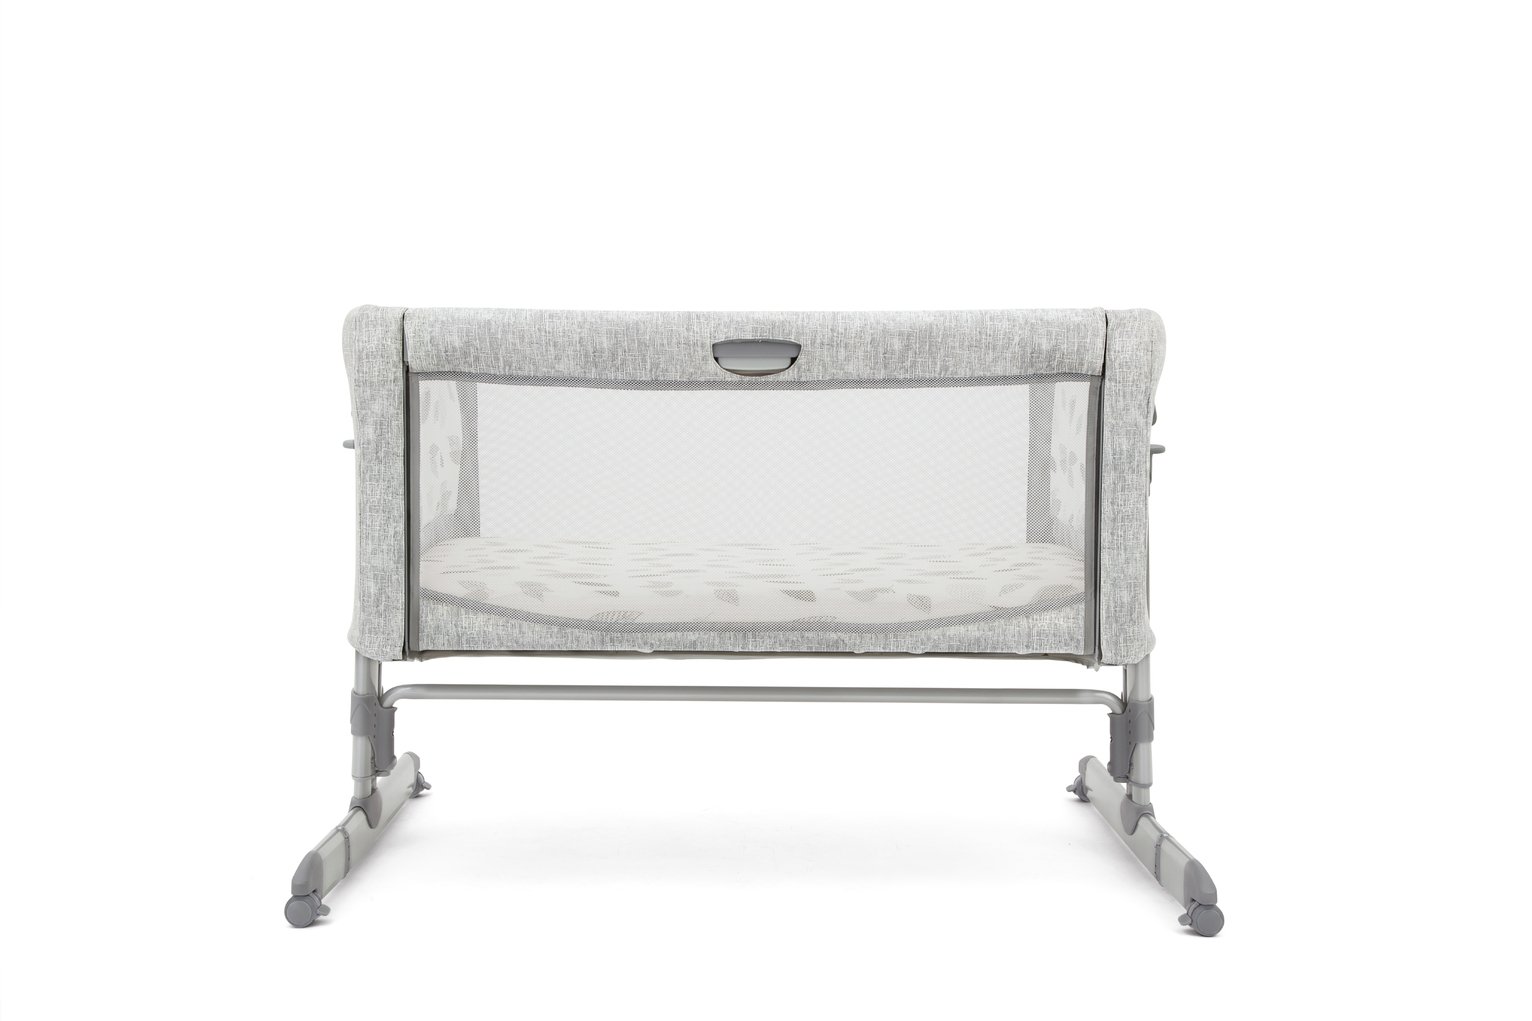 Joie Roomie Glide DLX Bedside Sleeper Crib Review